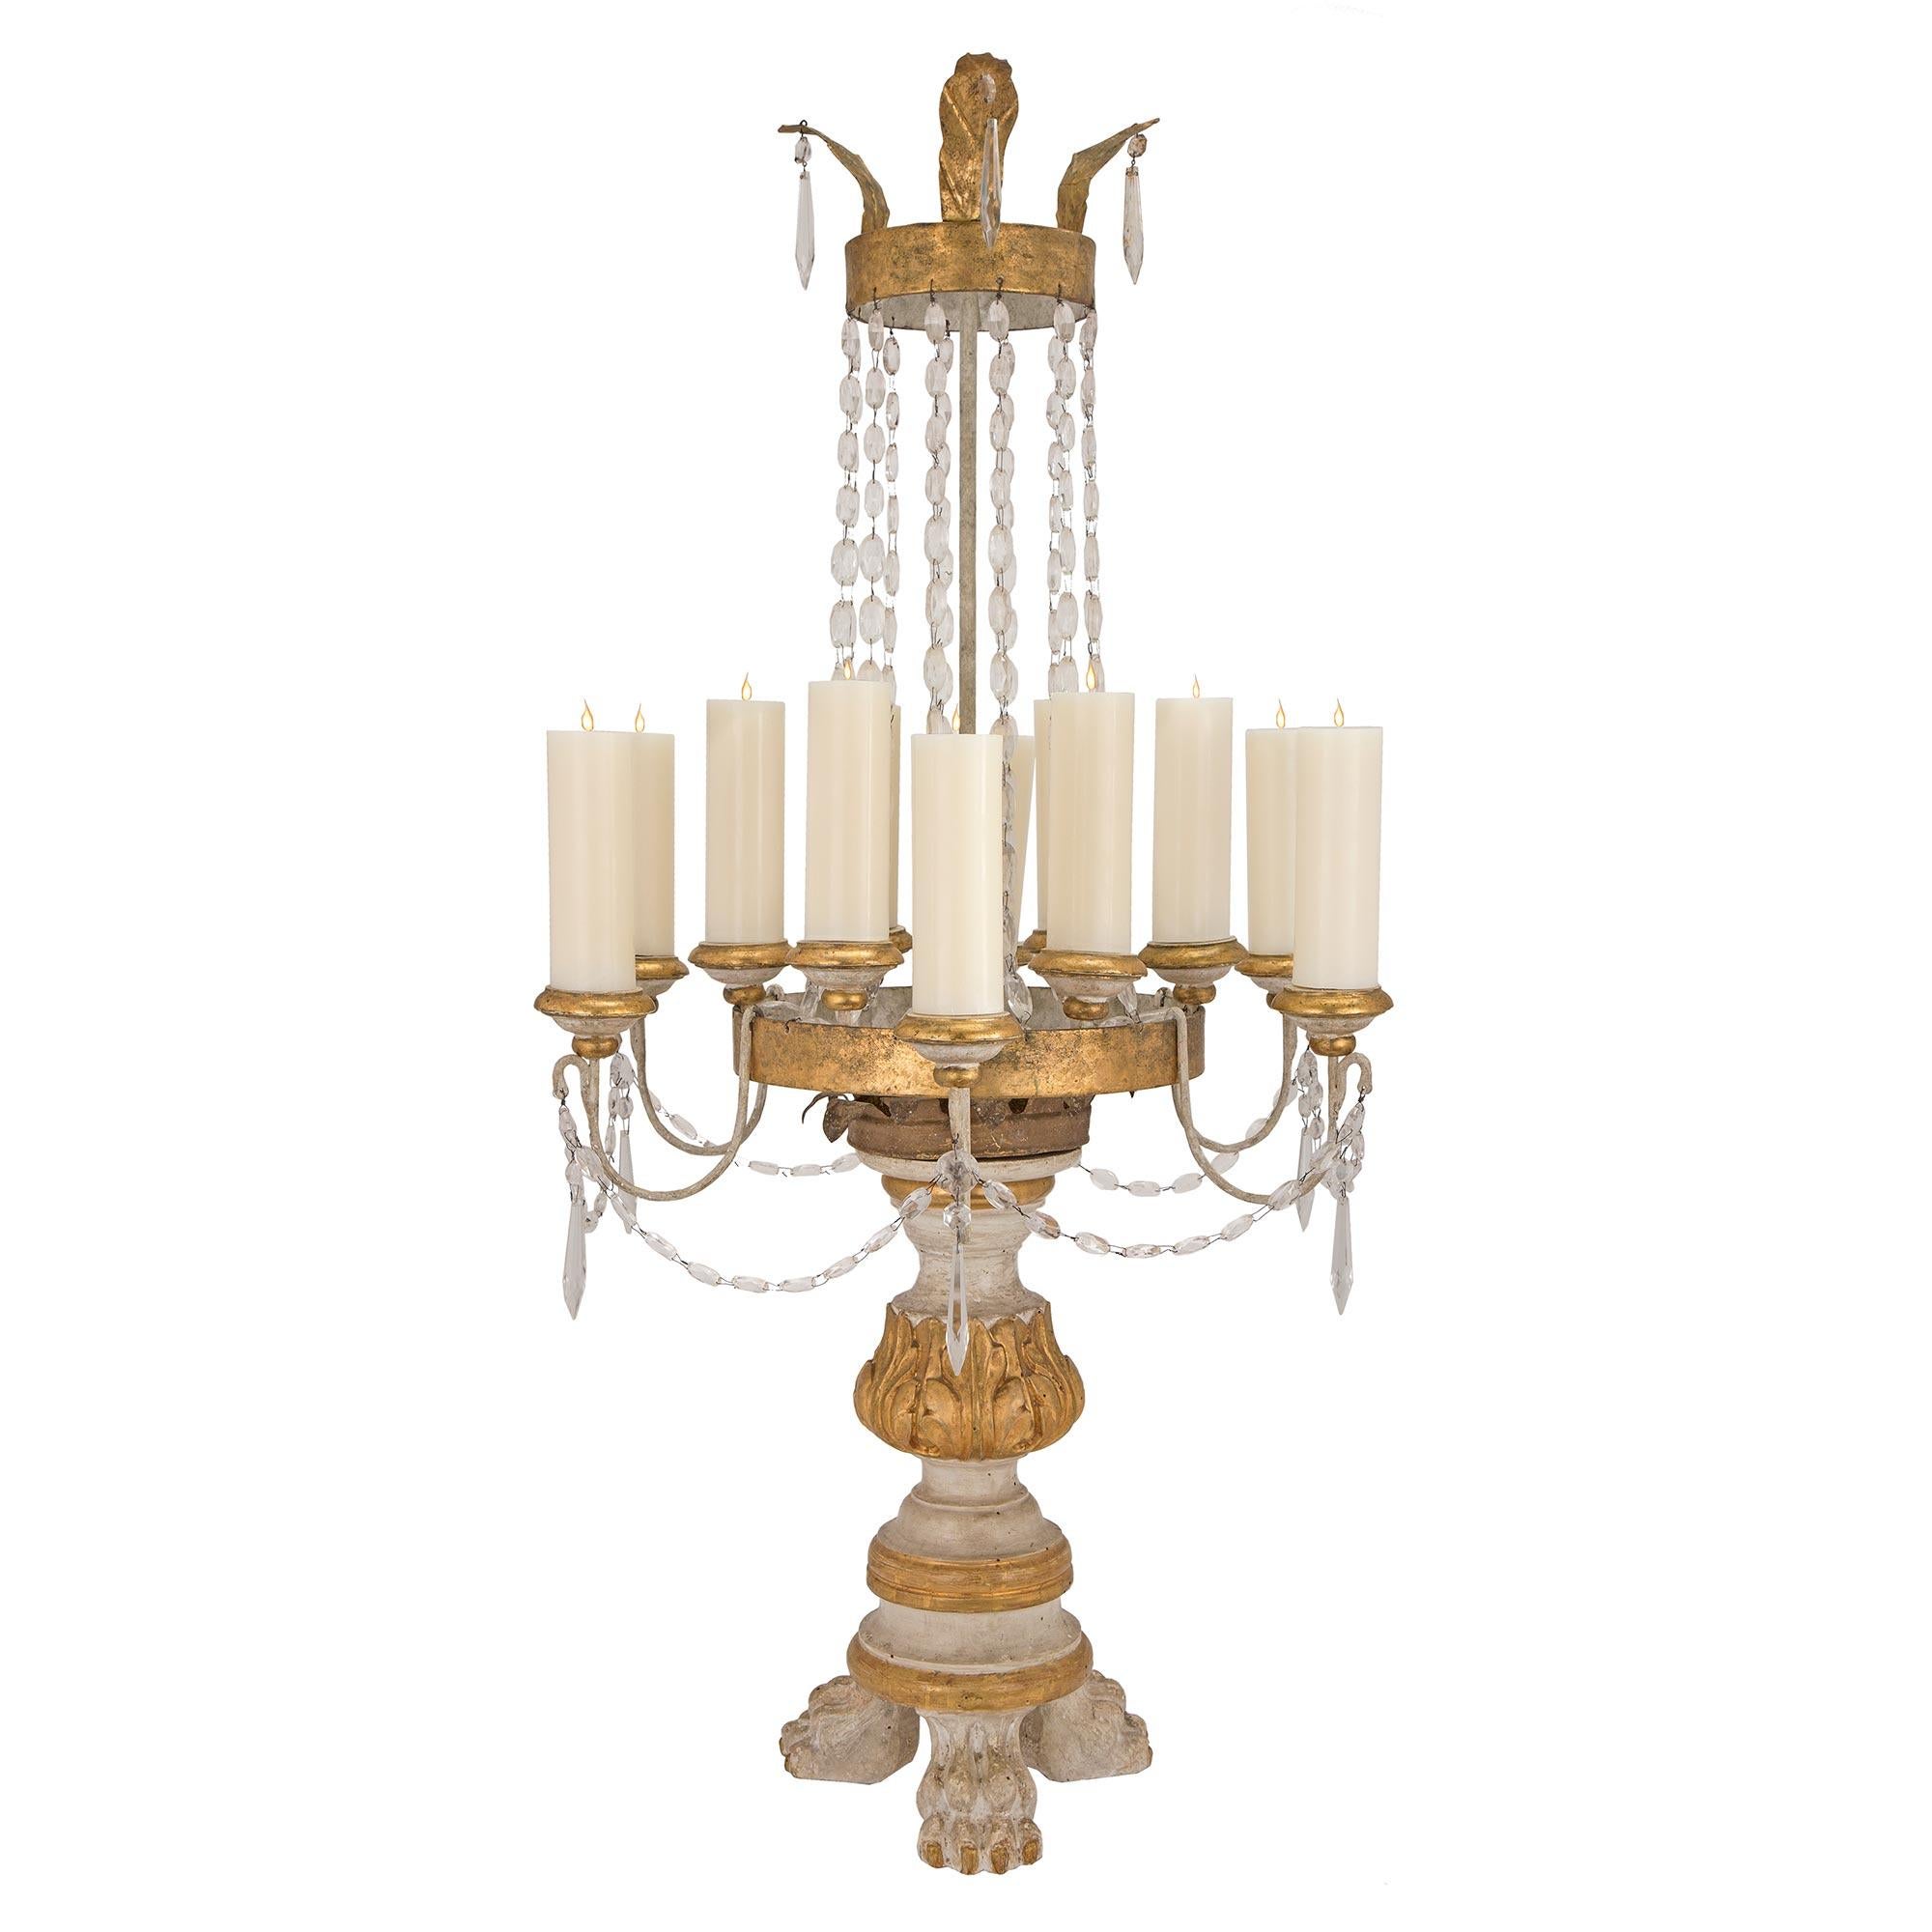 A very unique and large scale pair of Italian 18th century giltwood and gilt metal Tuscan candelabras. Each stunning twelve candle candelabra is raised by patinated paw shaped feet. The central patinated support is adorned with giltwood bands and